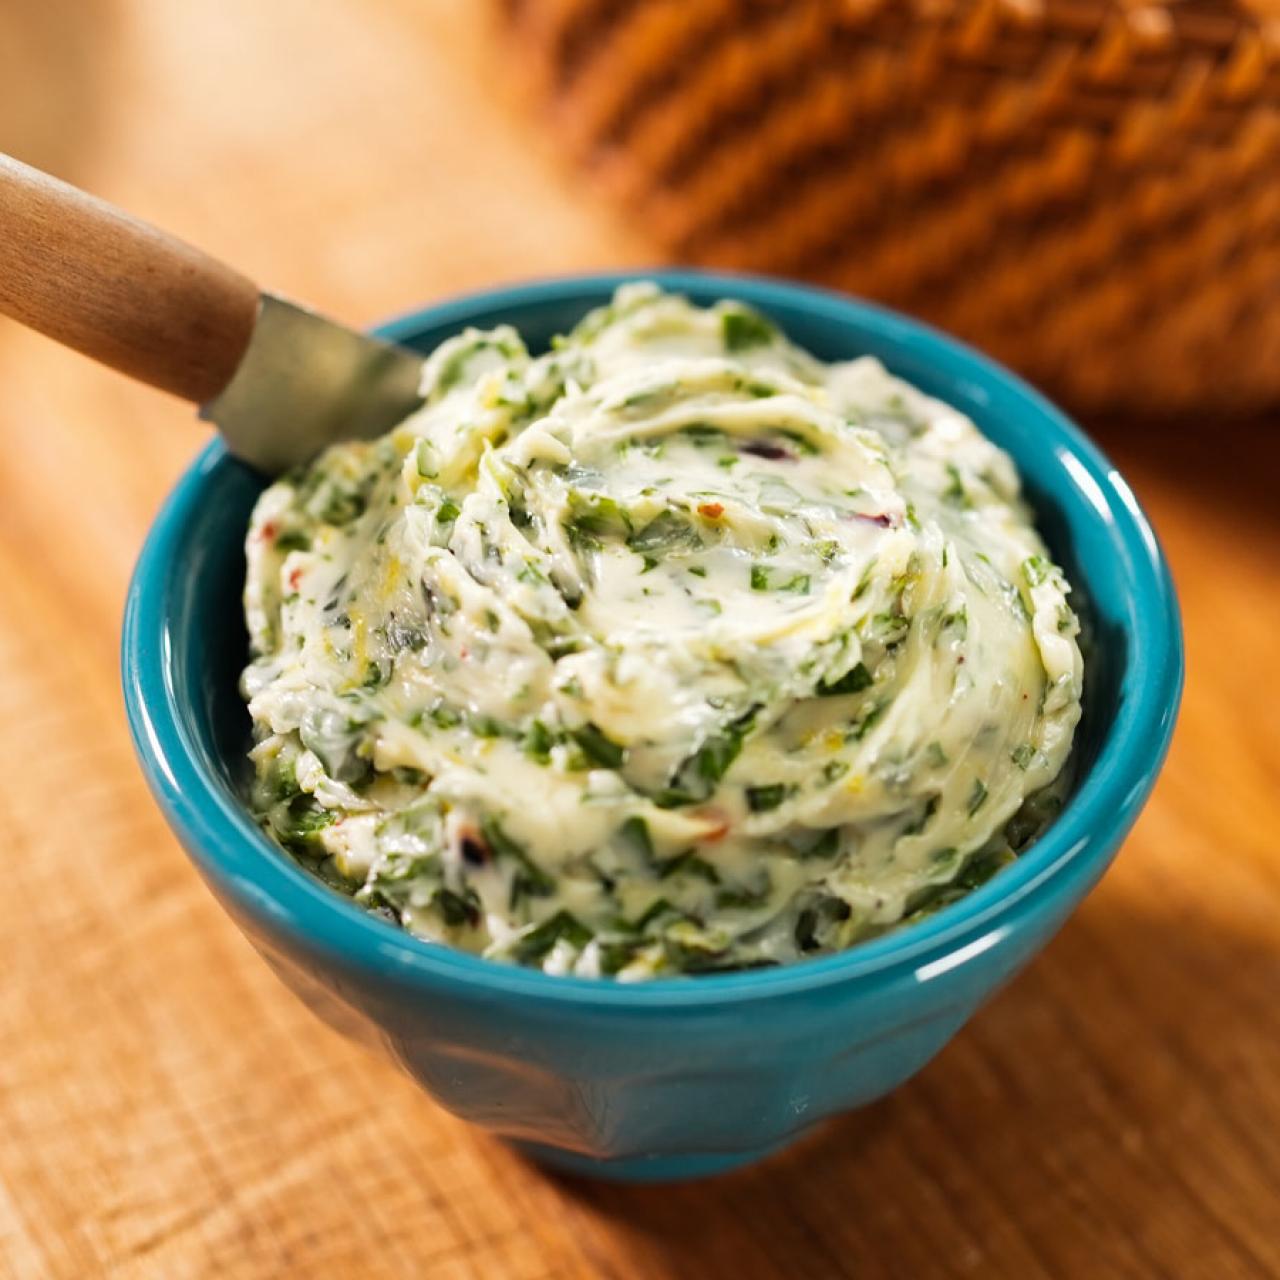 Herb Infused Compound Butter Recipes